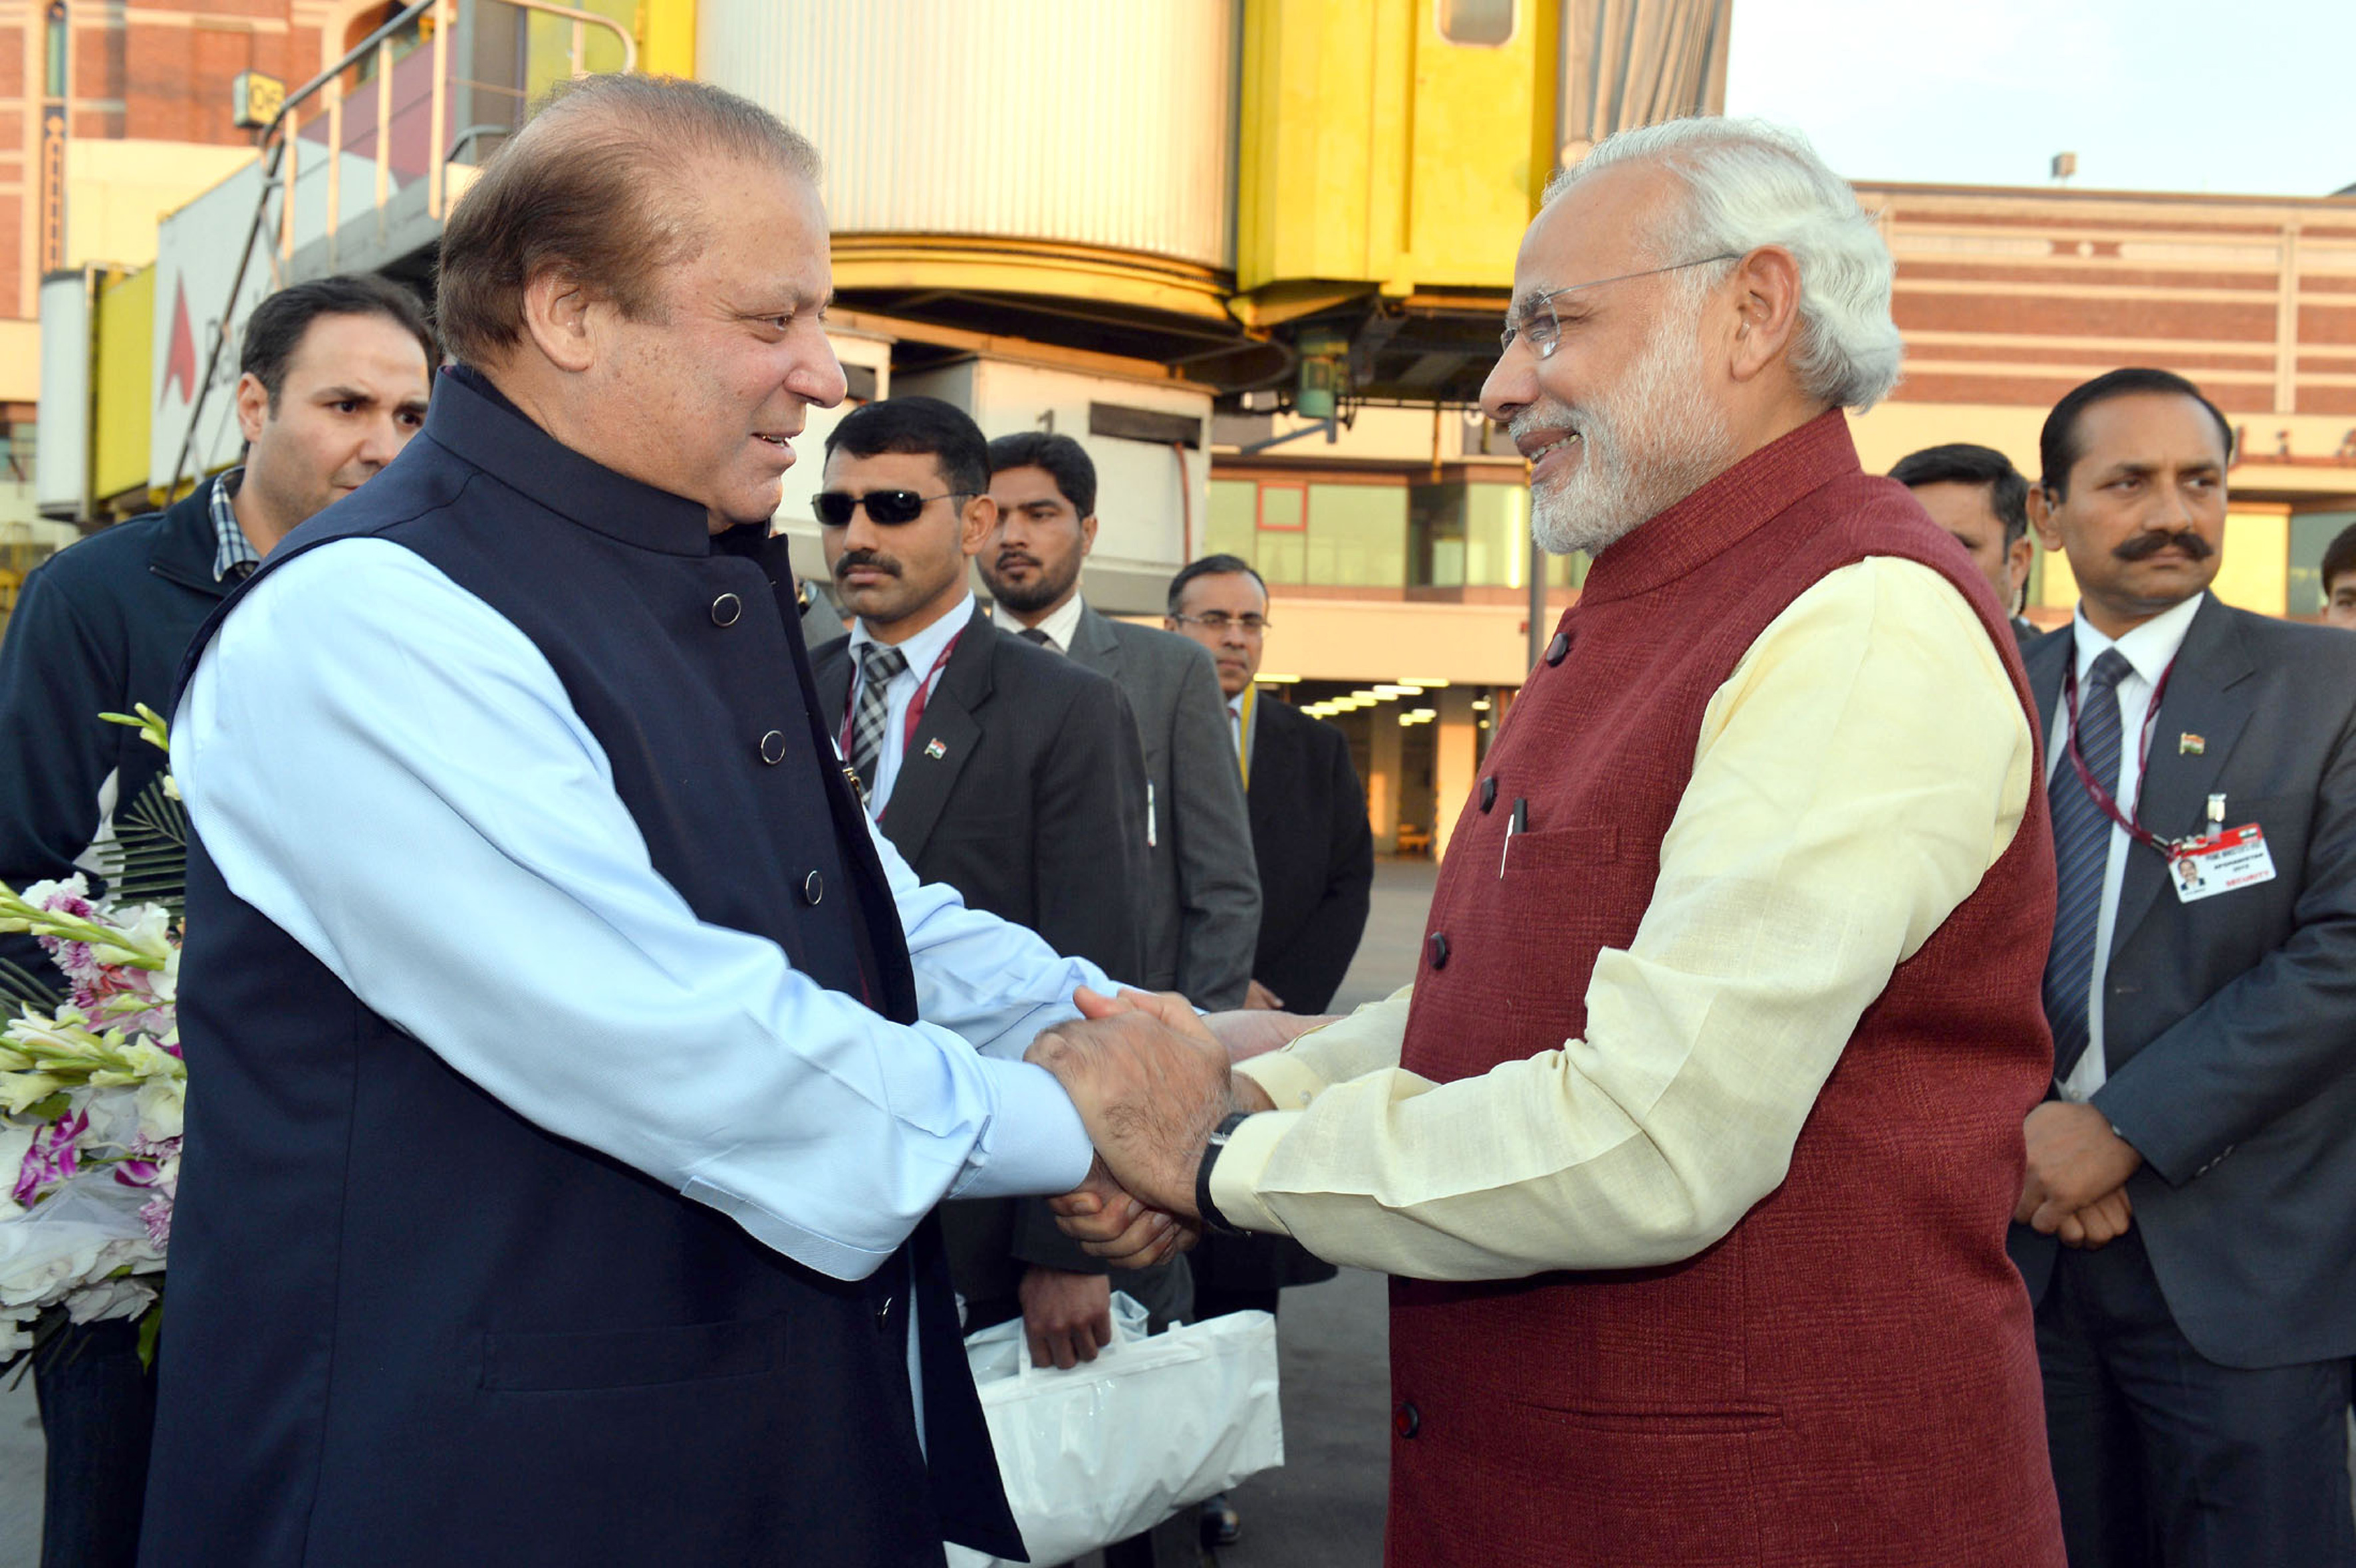 Narendra Modi has made attempts to reach out to Nawaz Sharif in the past. Source: EPA